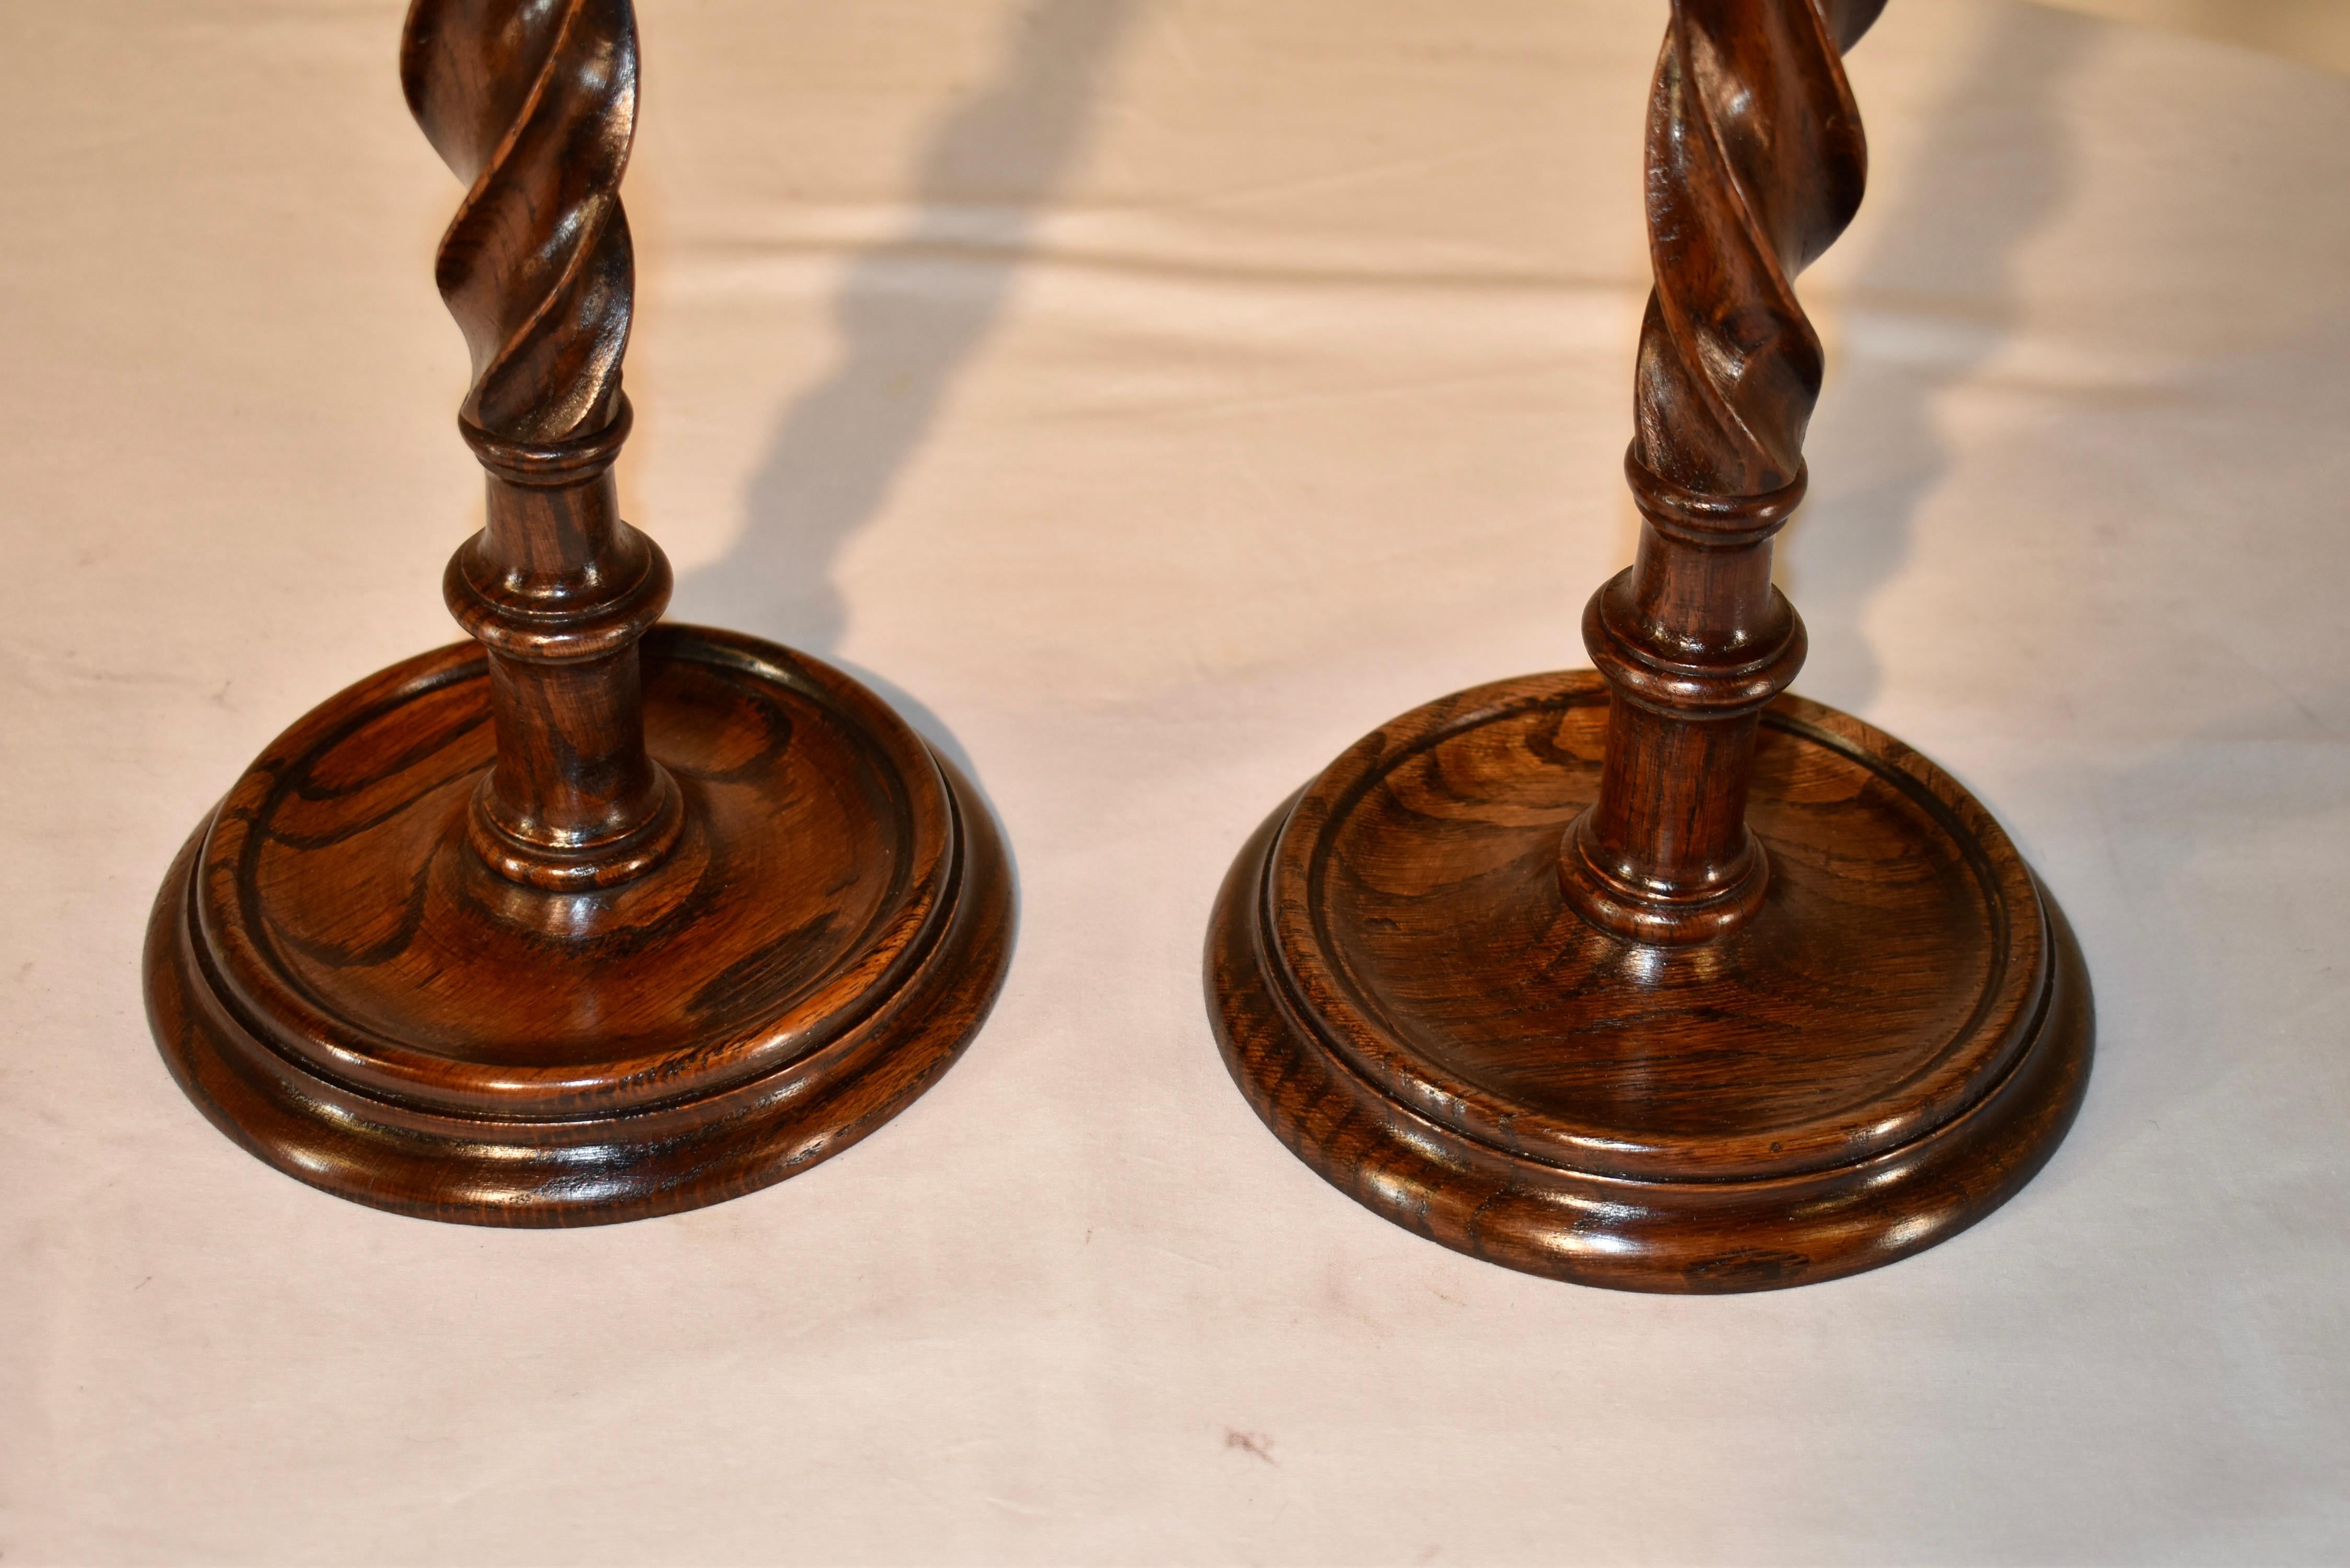 Turned Pair of 19th Century Ribbon Twist Candlesticks For Sale